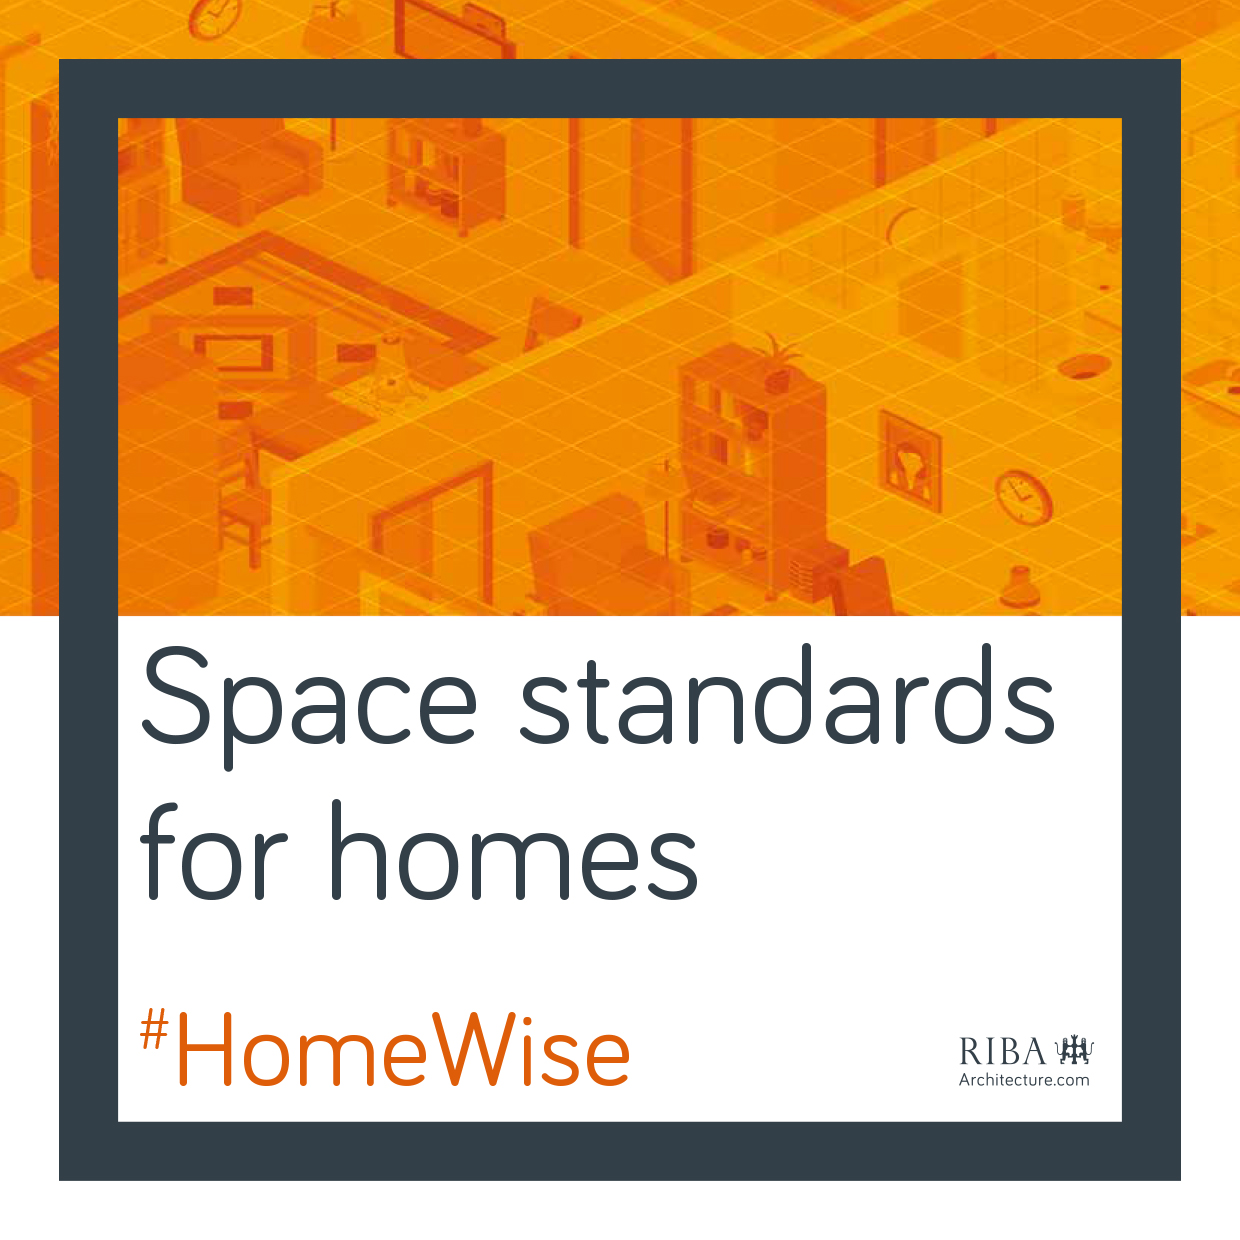 Space standards for homes